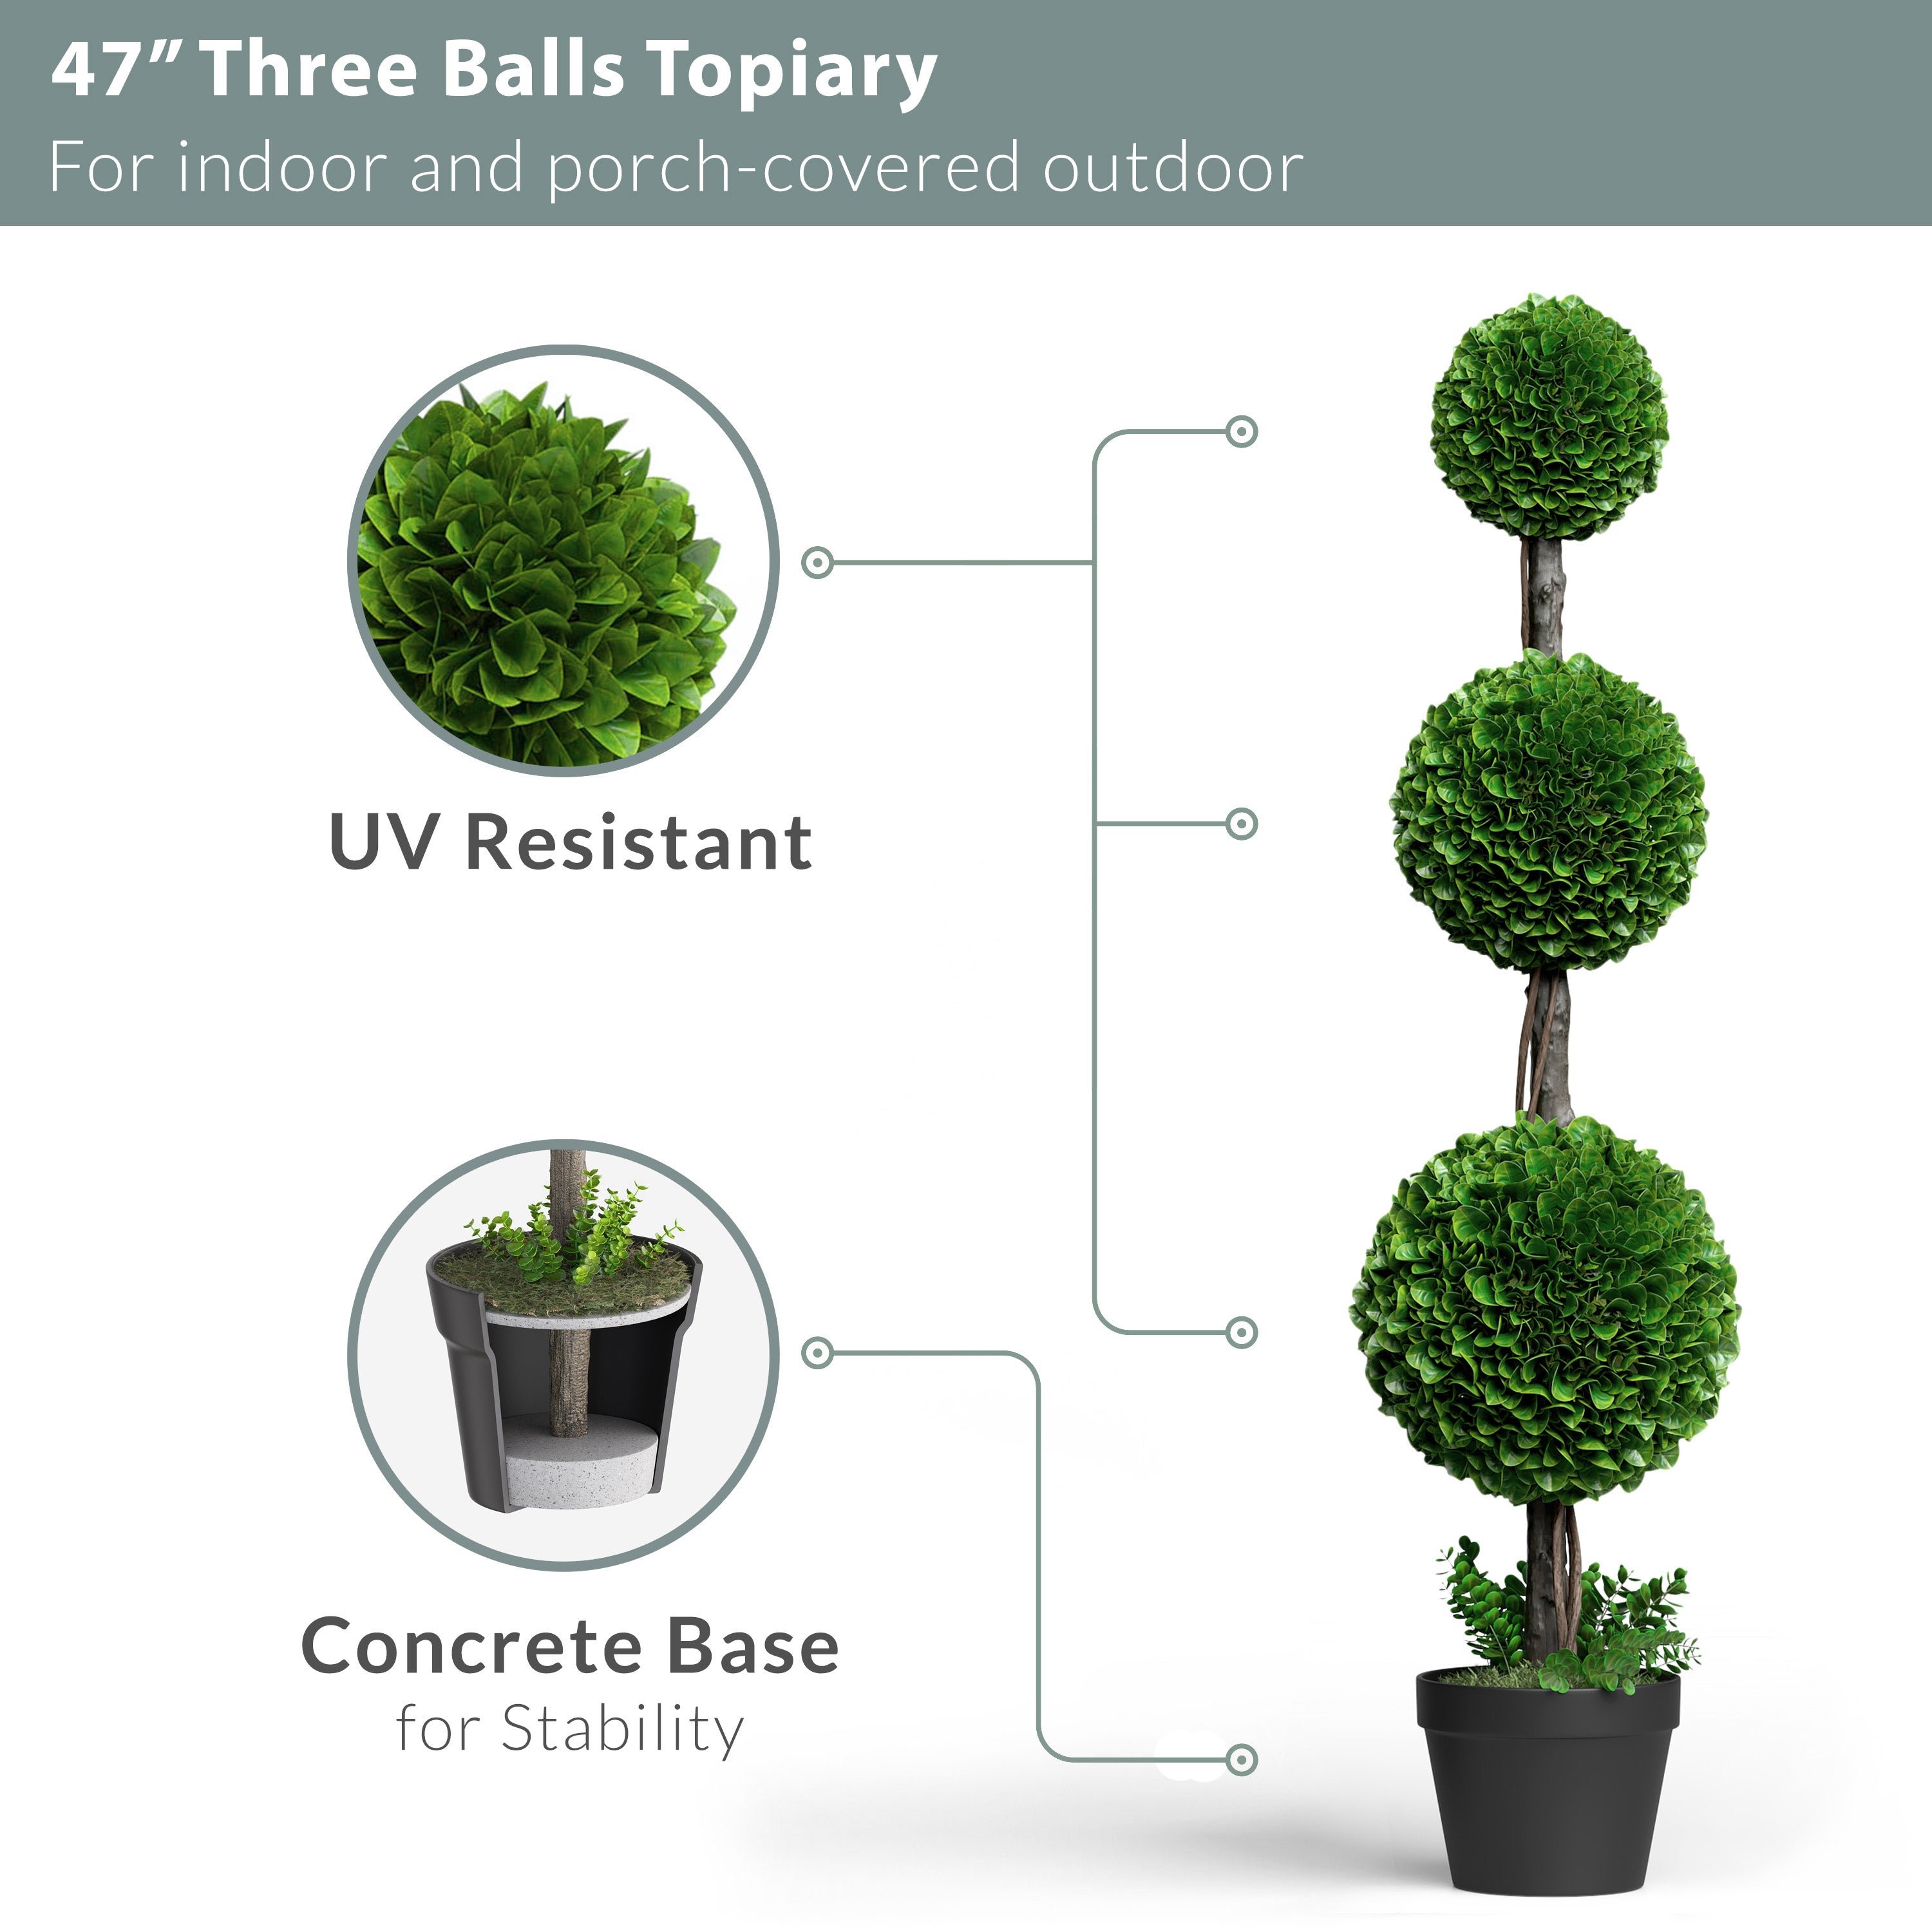 Artificial Topiary Greenery Balls Plants Boxwood Green Outdoor Indoor Décor  Fake